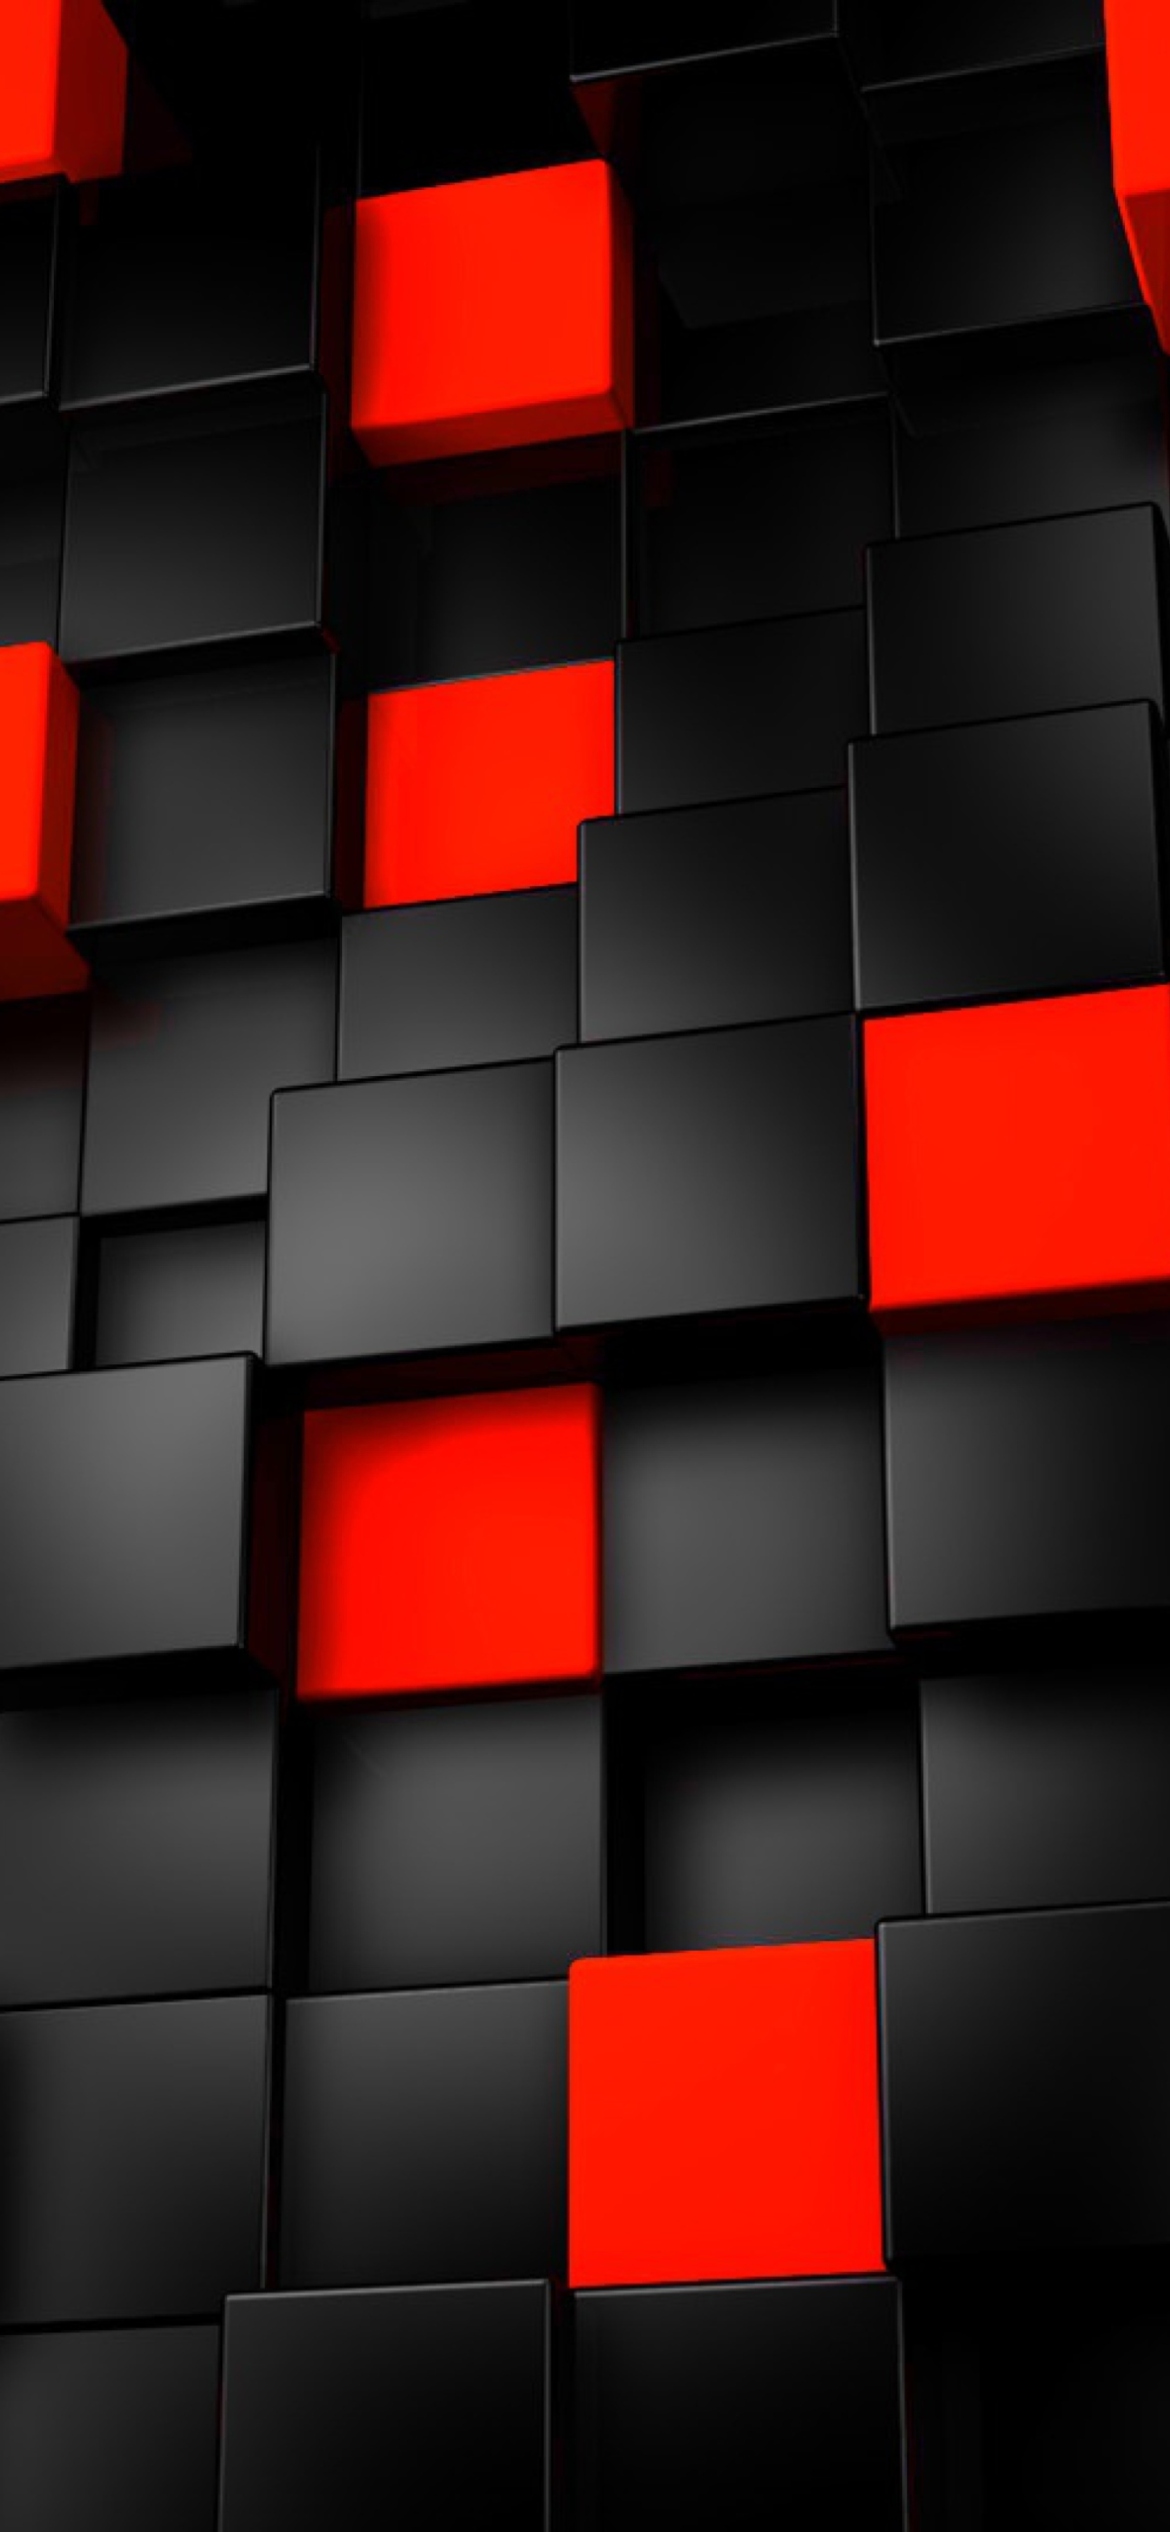 Sfondi Abstract Black And Red Cubes 1170x2532